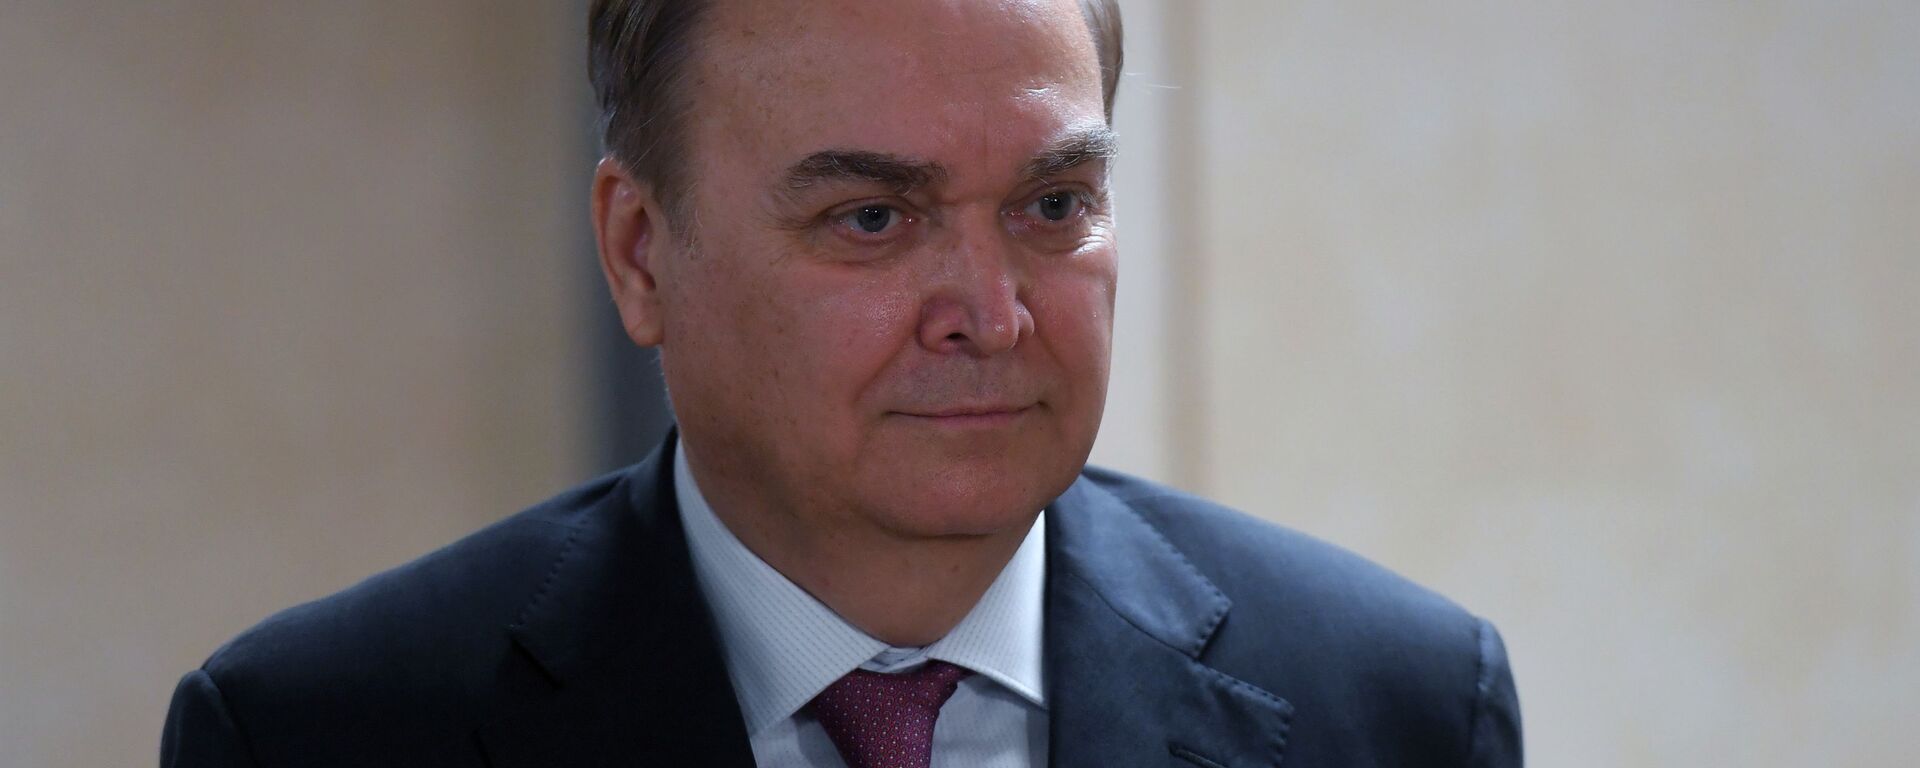 Ambassador Extraordinary and Plenipotentiary of the Russian Federation to the United States of America Anatoly Antonov during a briefing at the State Duma of the Russian Federation in Moscow. - Sputnik International, 1920, 06.03.2022